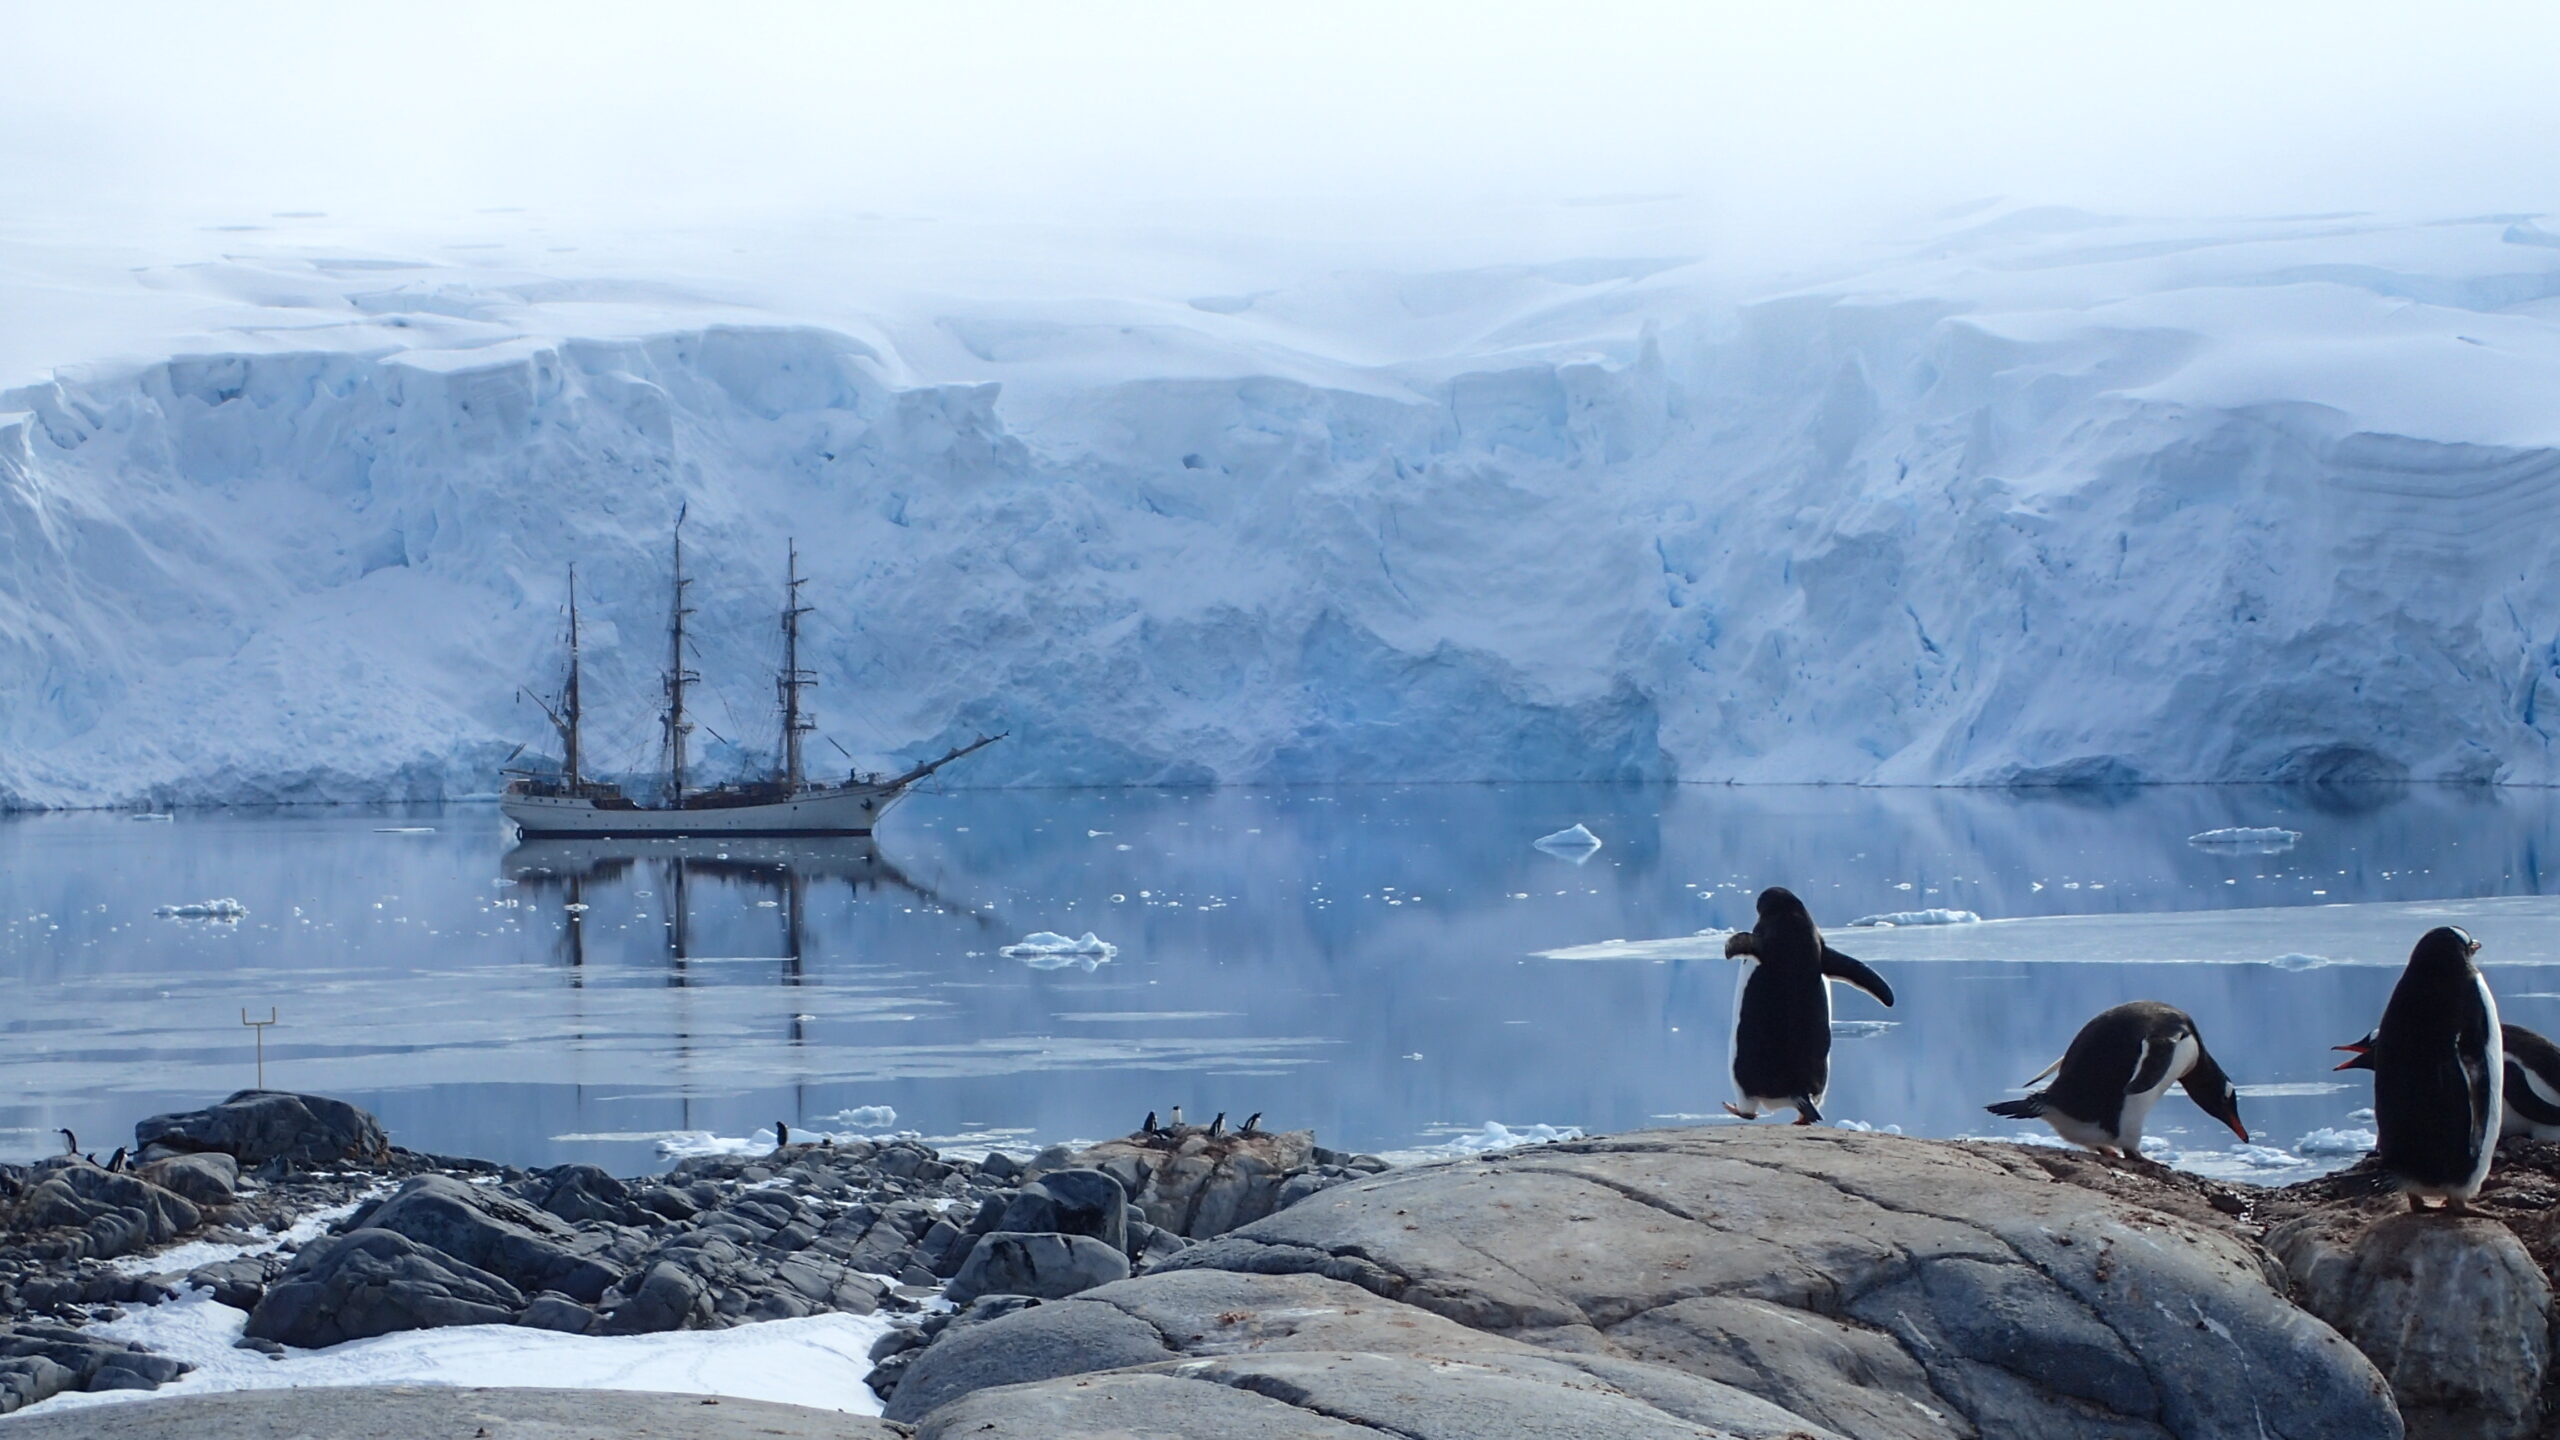 MEMBER NEWS: RMI successfully supports UK Antarctic Heritage Trust’s latest Port Lockroy expedition – home to the world’s southernmost post office and museum